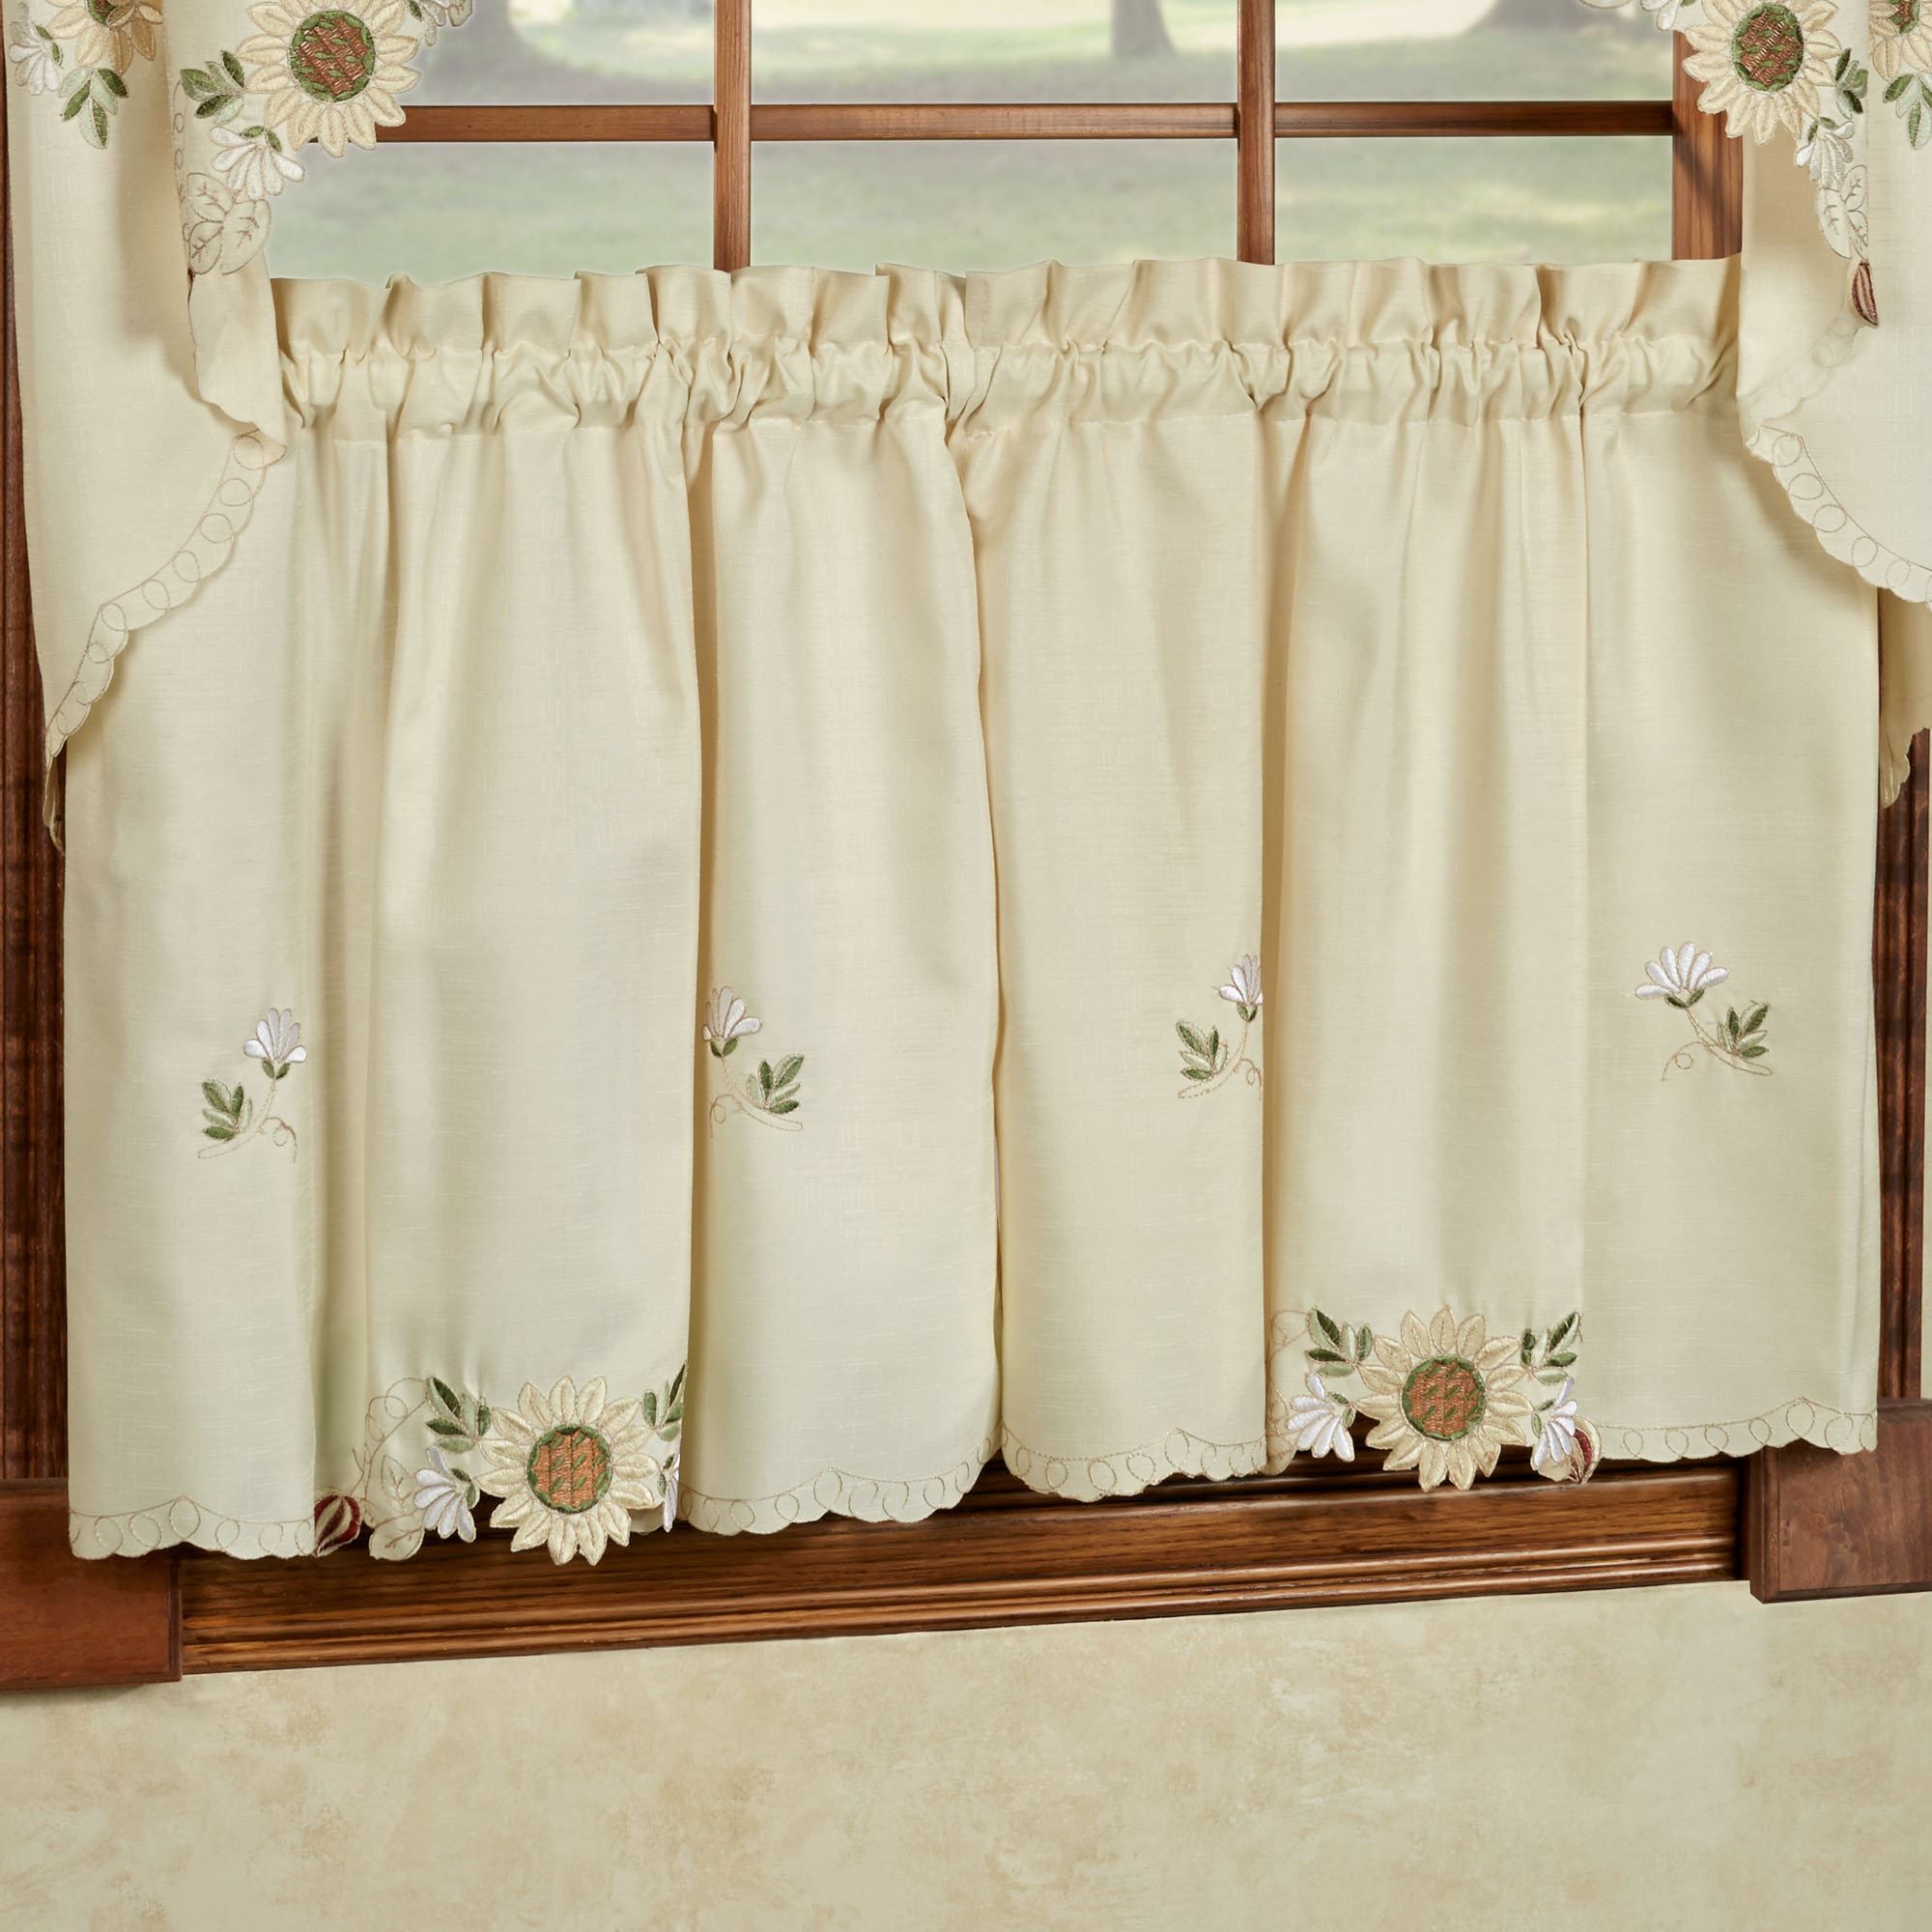 Sunflower Embroidered Tier Window Treatment In Traditional Tailored Window Curtains With Embroidered Yellow Sunflowers (View 6 of 20)